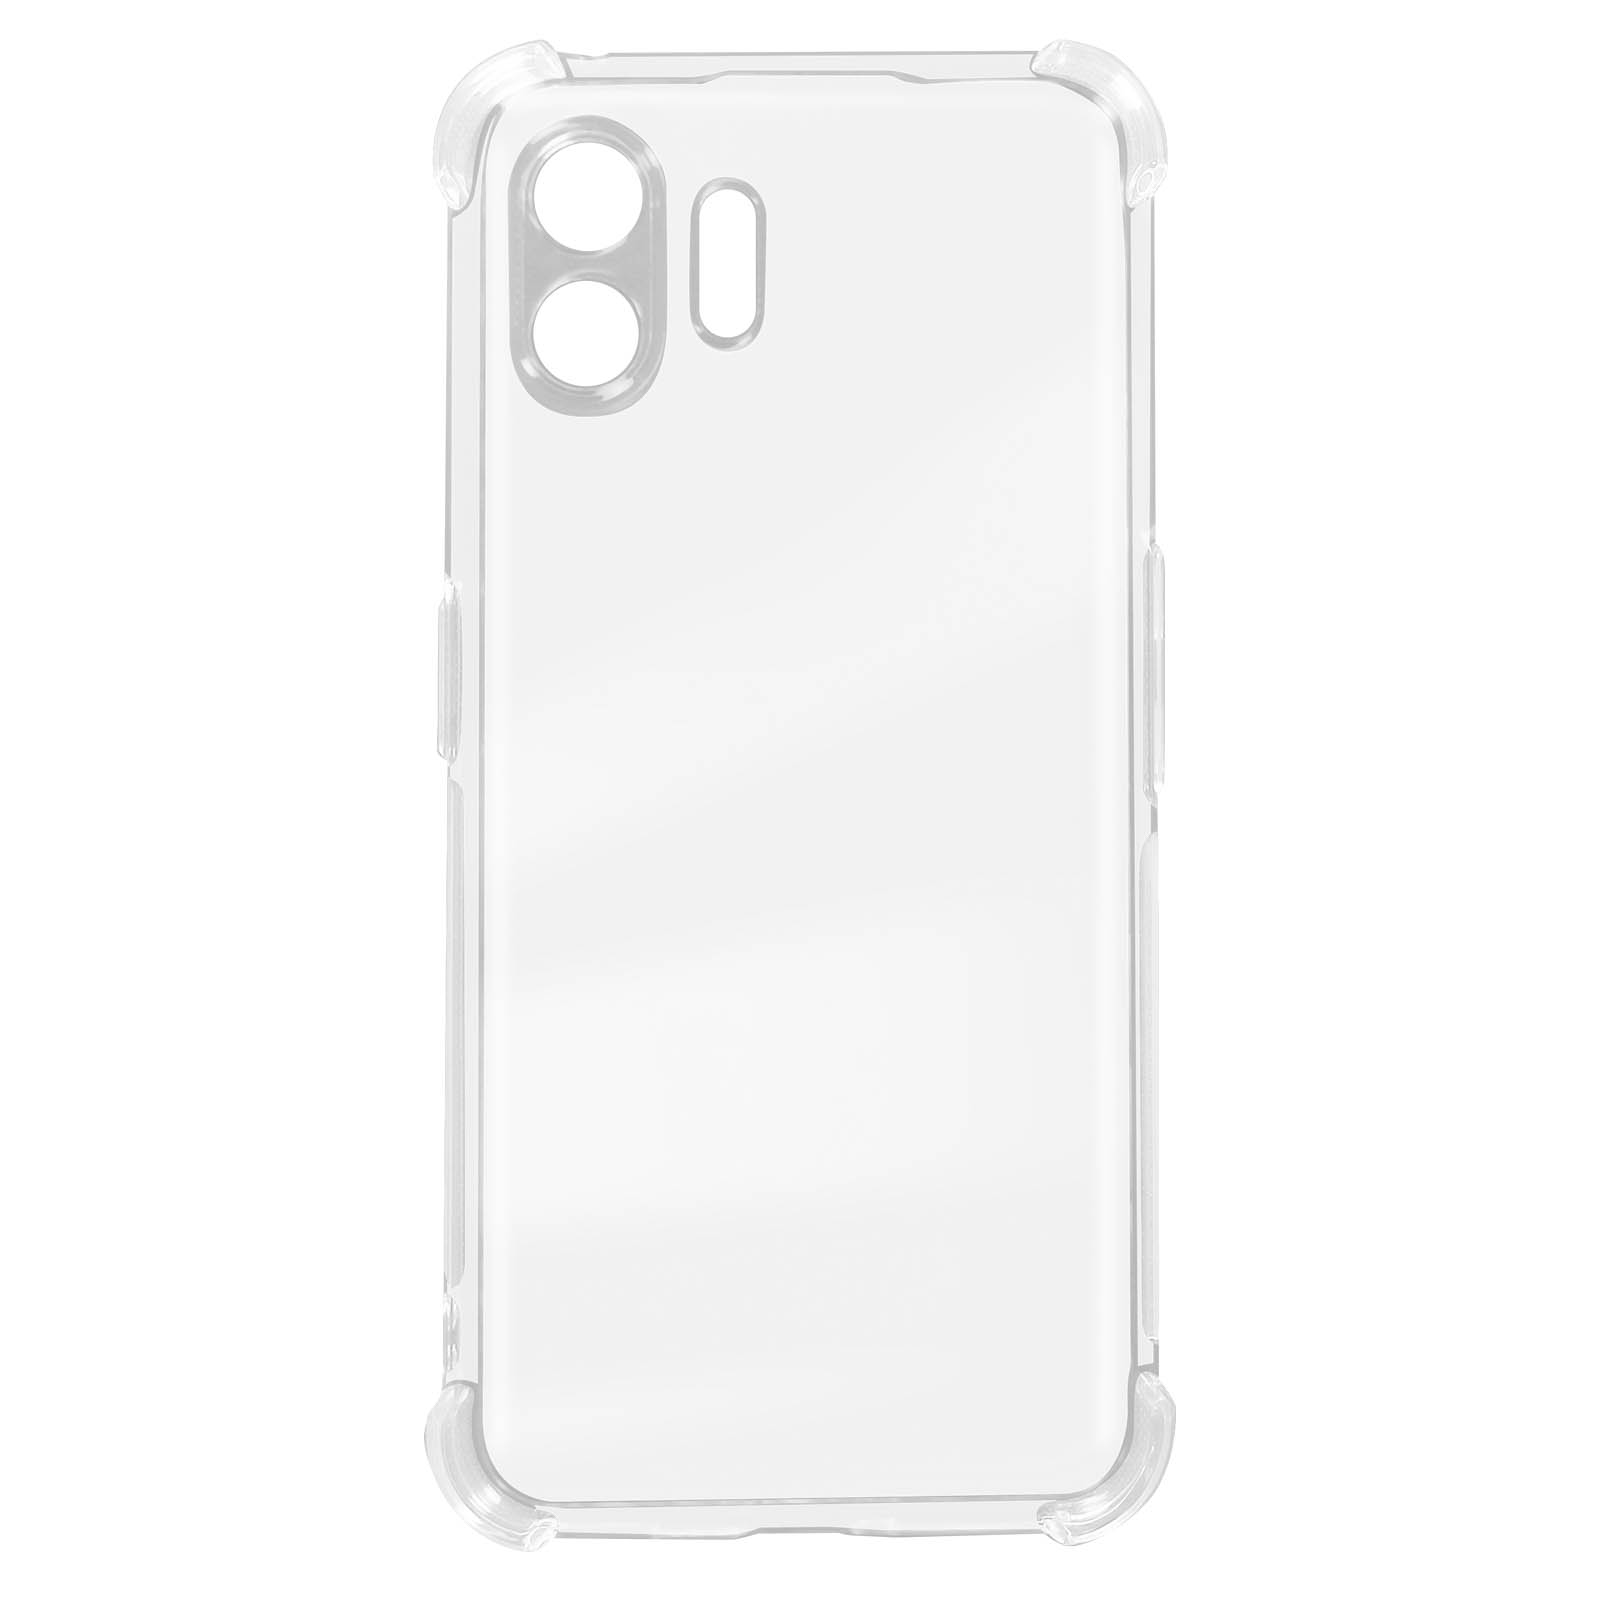 AVIZAR Classic Bump Series, Backcover, Nothing, Phone 2, Transparent